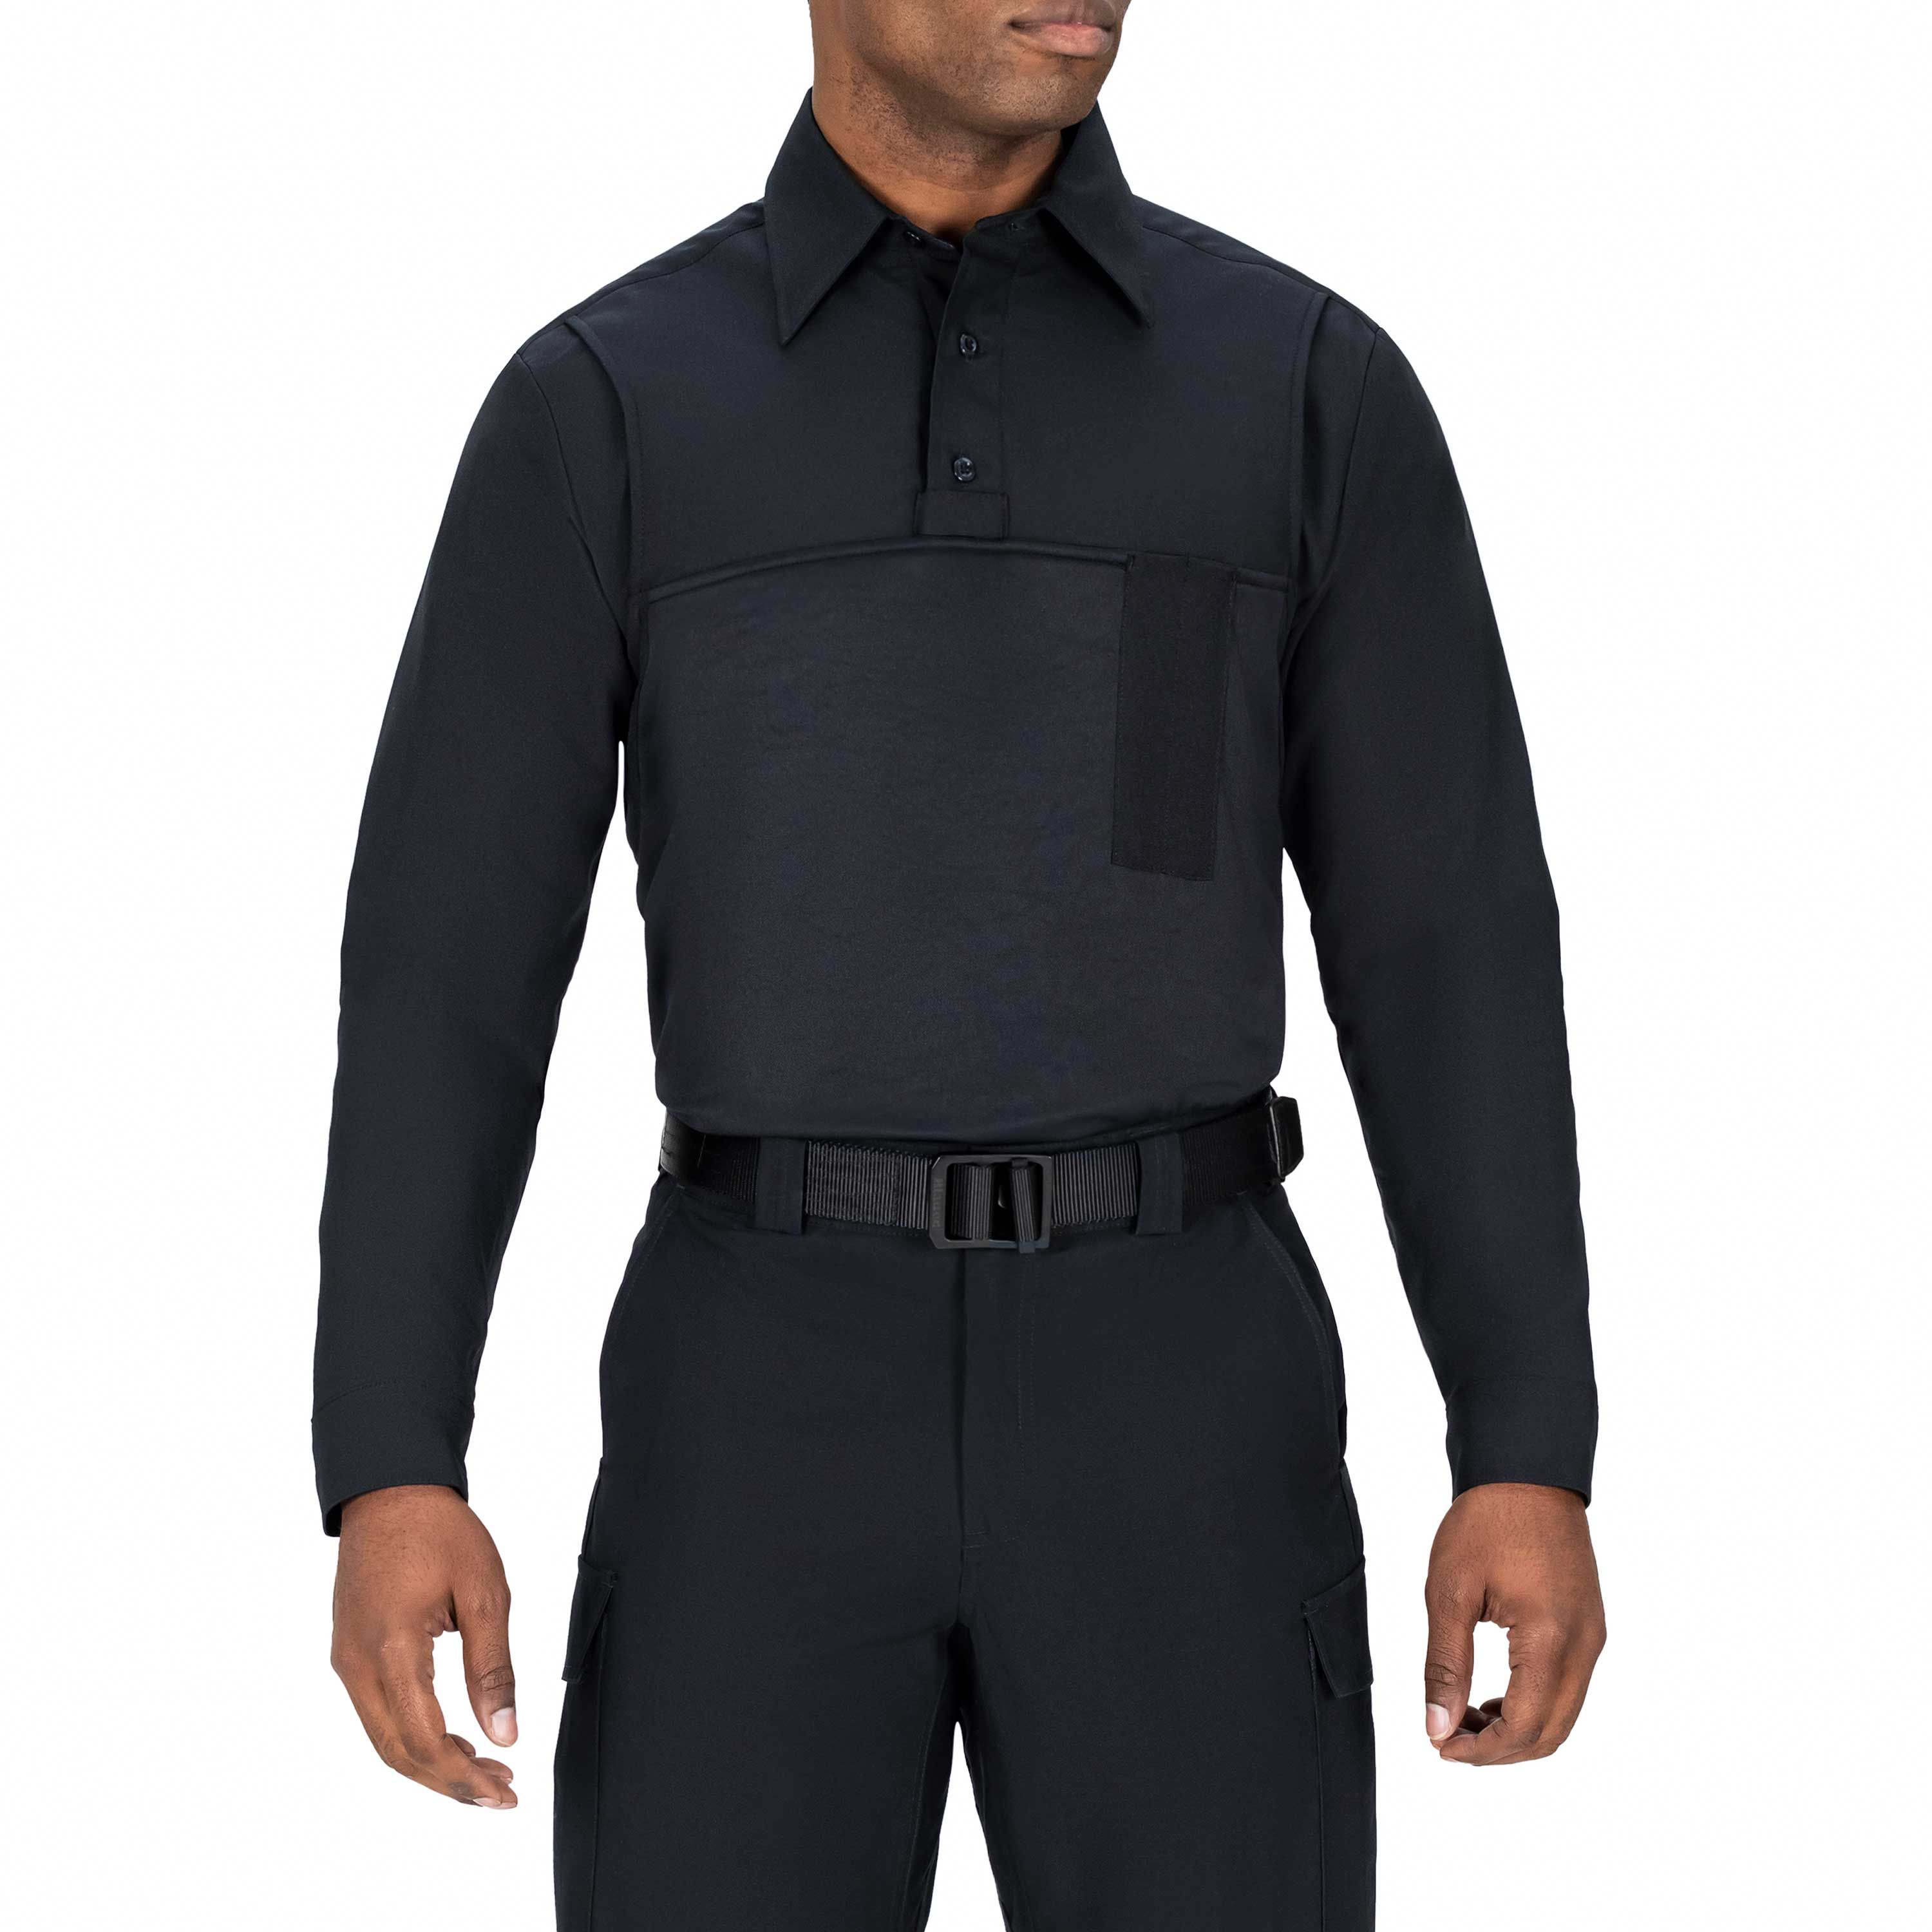  Base Layers & Compression: Clothing, Shoes & Accessories: Pants,  Shirts, Shorts, Arm Warmers & More